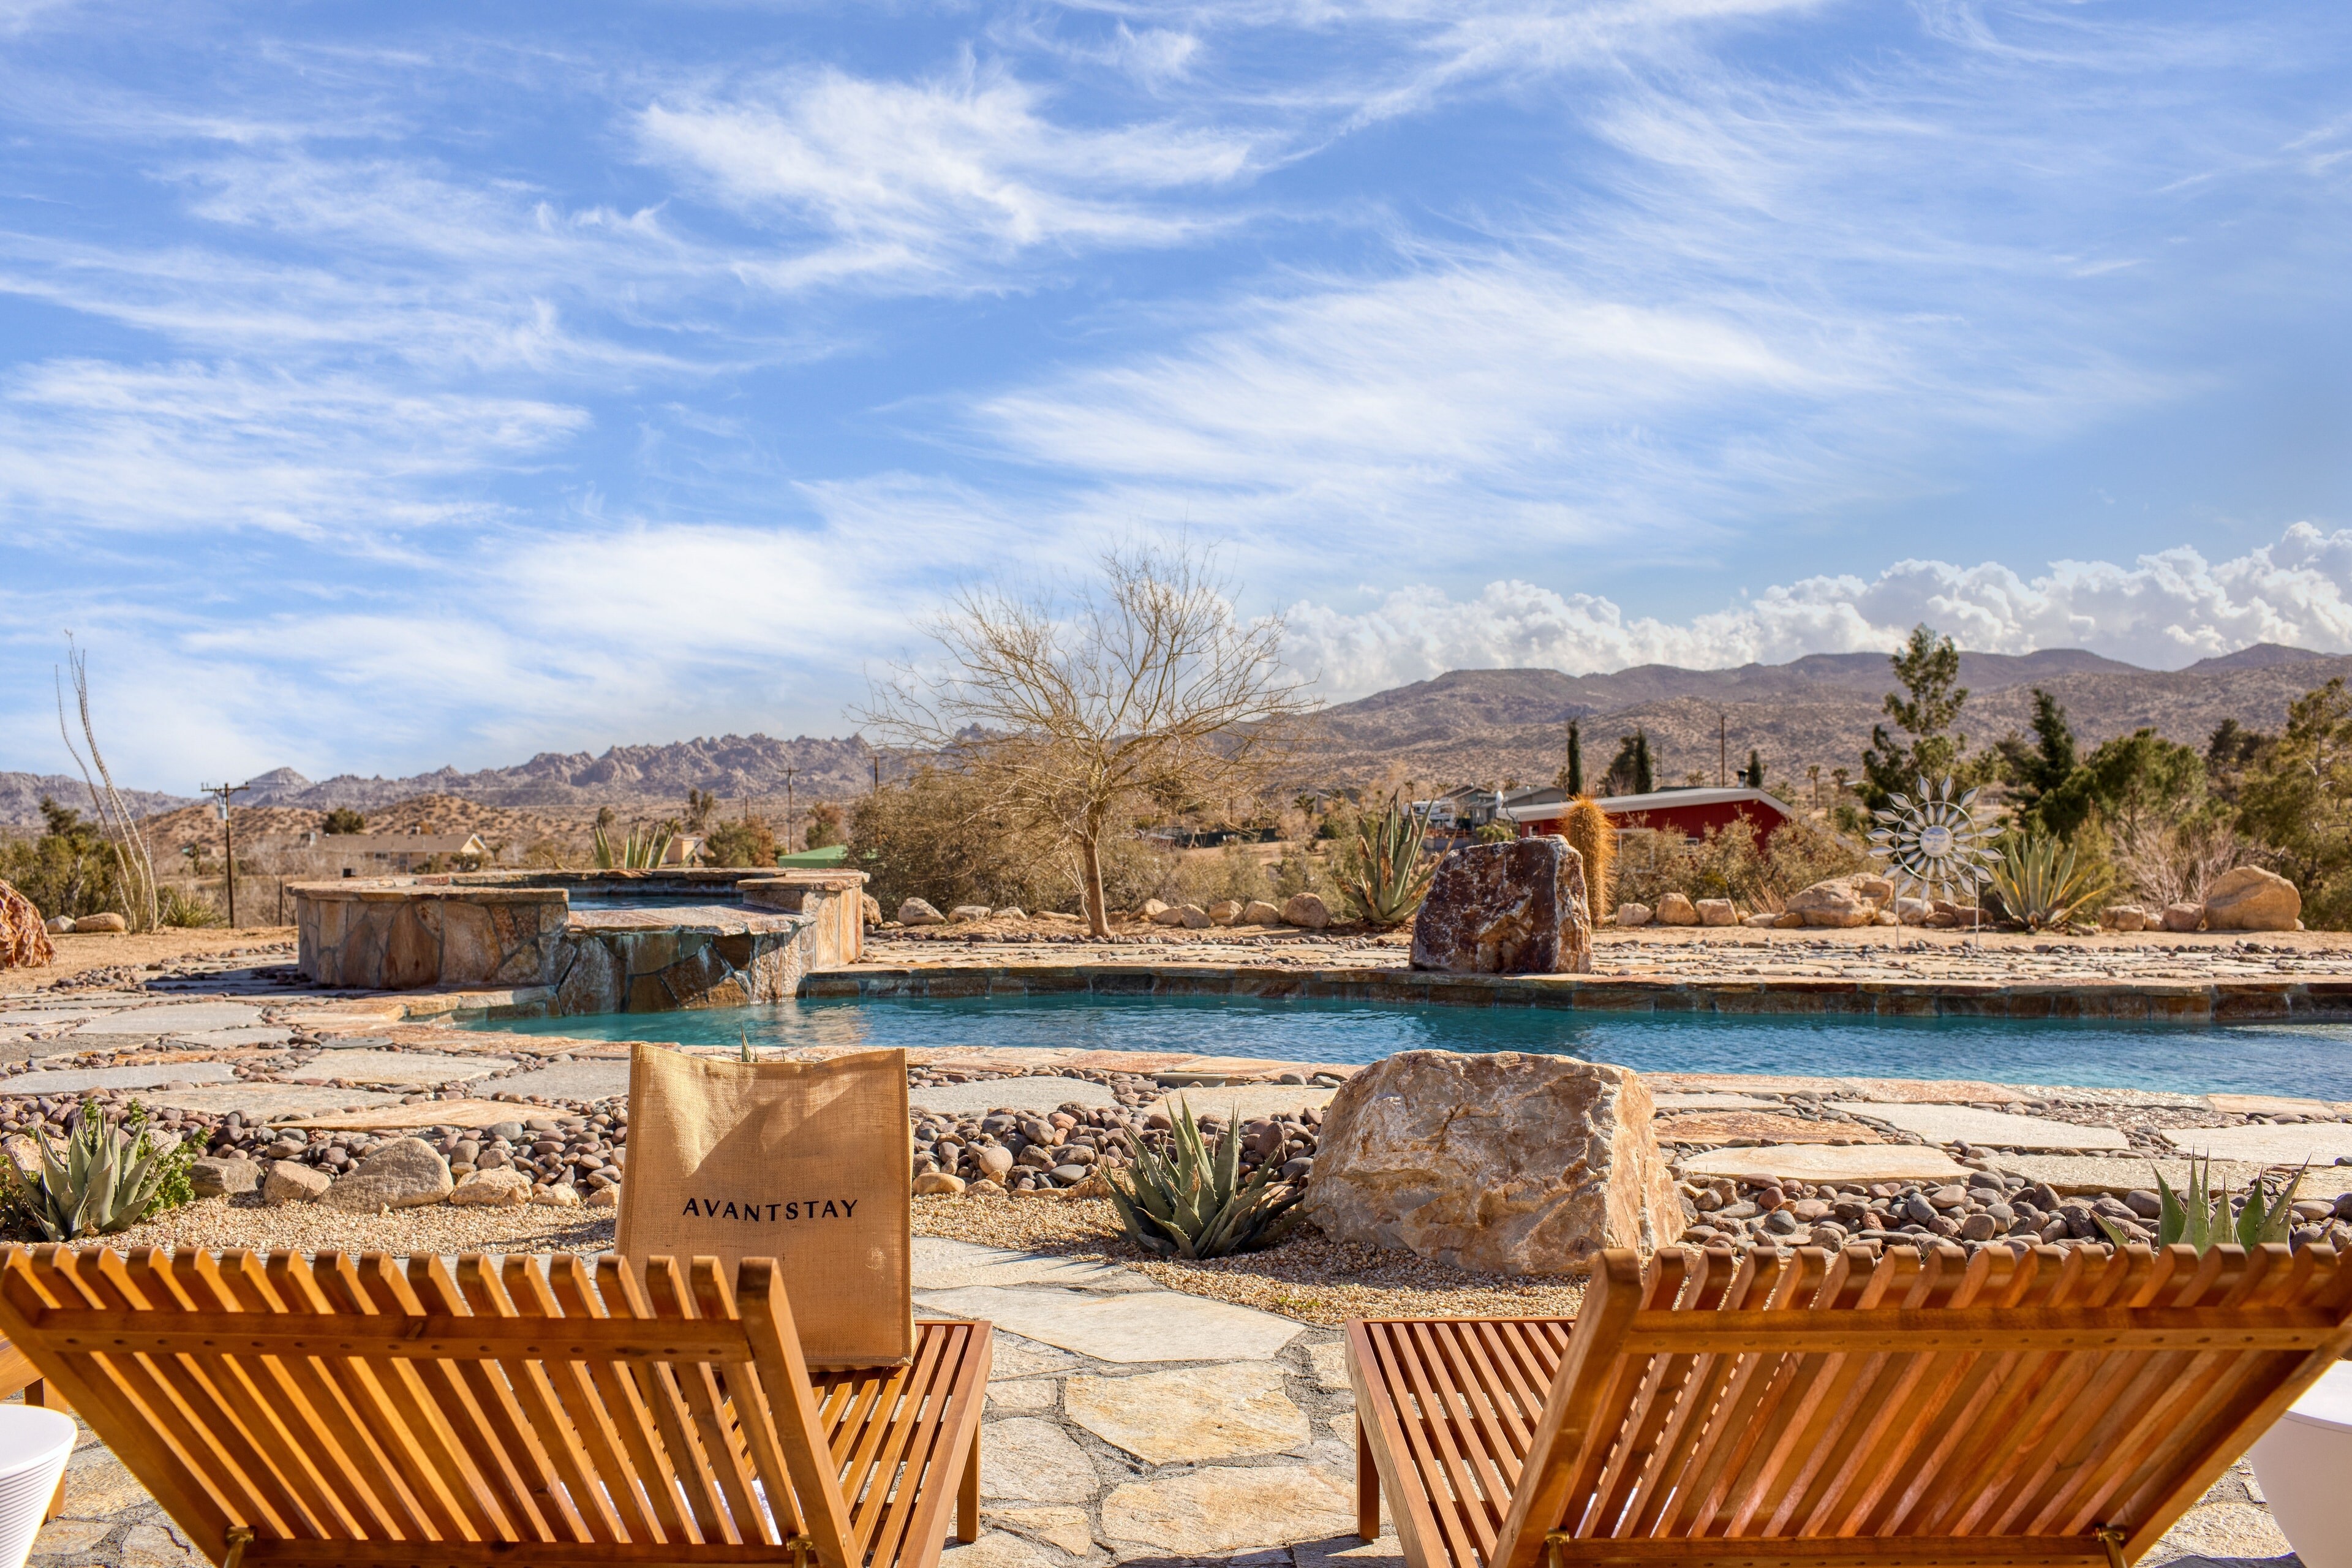 Fall into the serenity of the desert, where you can enjoy a refreshing swim in the lap of nature.